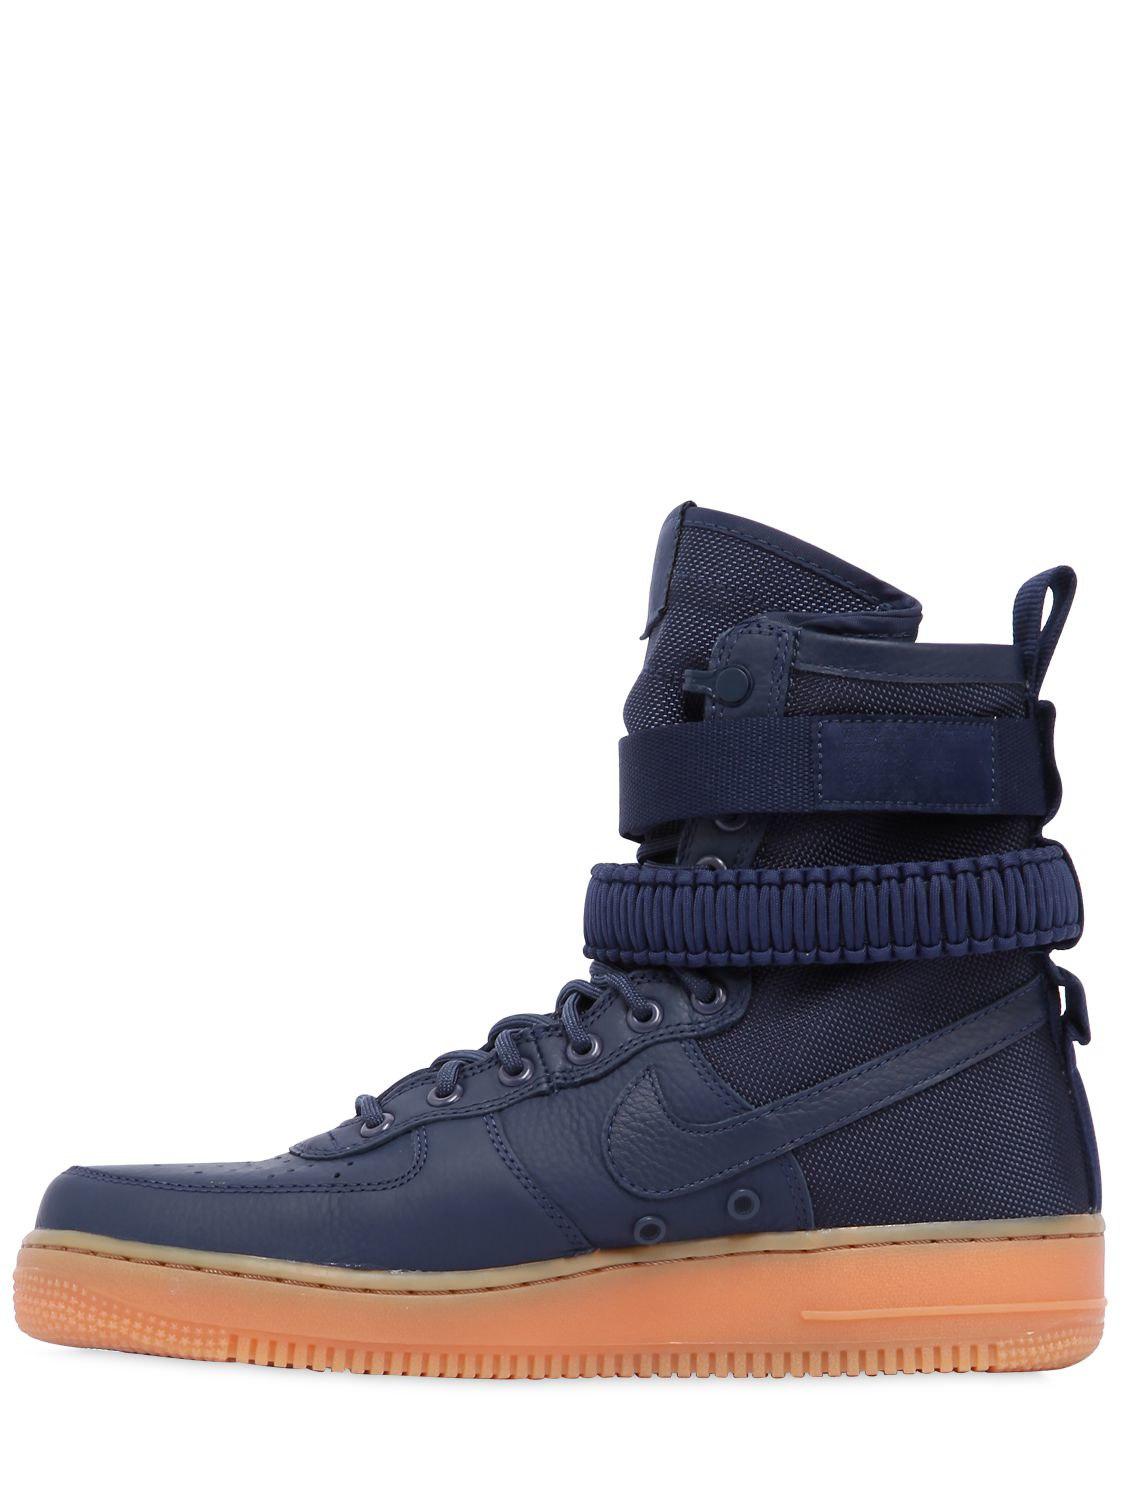 Nike Leather Sf Air Force 1 High Top Sneakers in Blue - Lyst